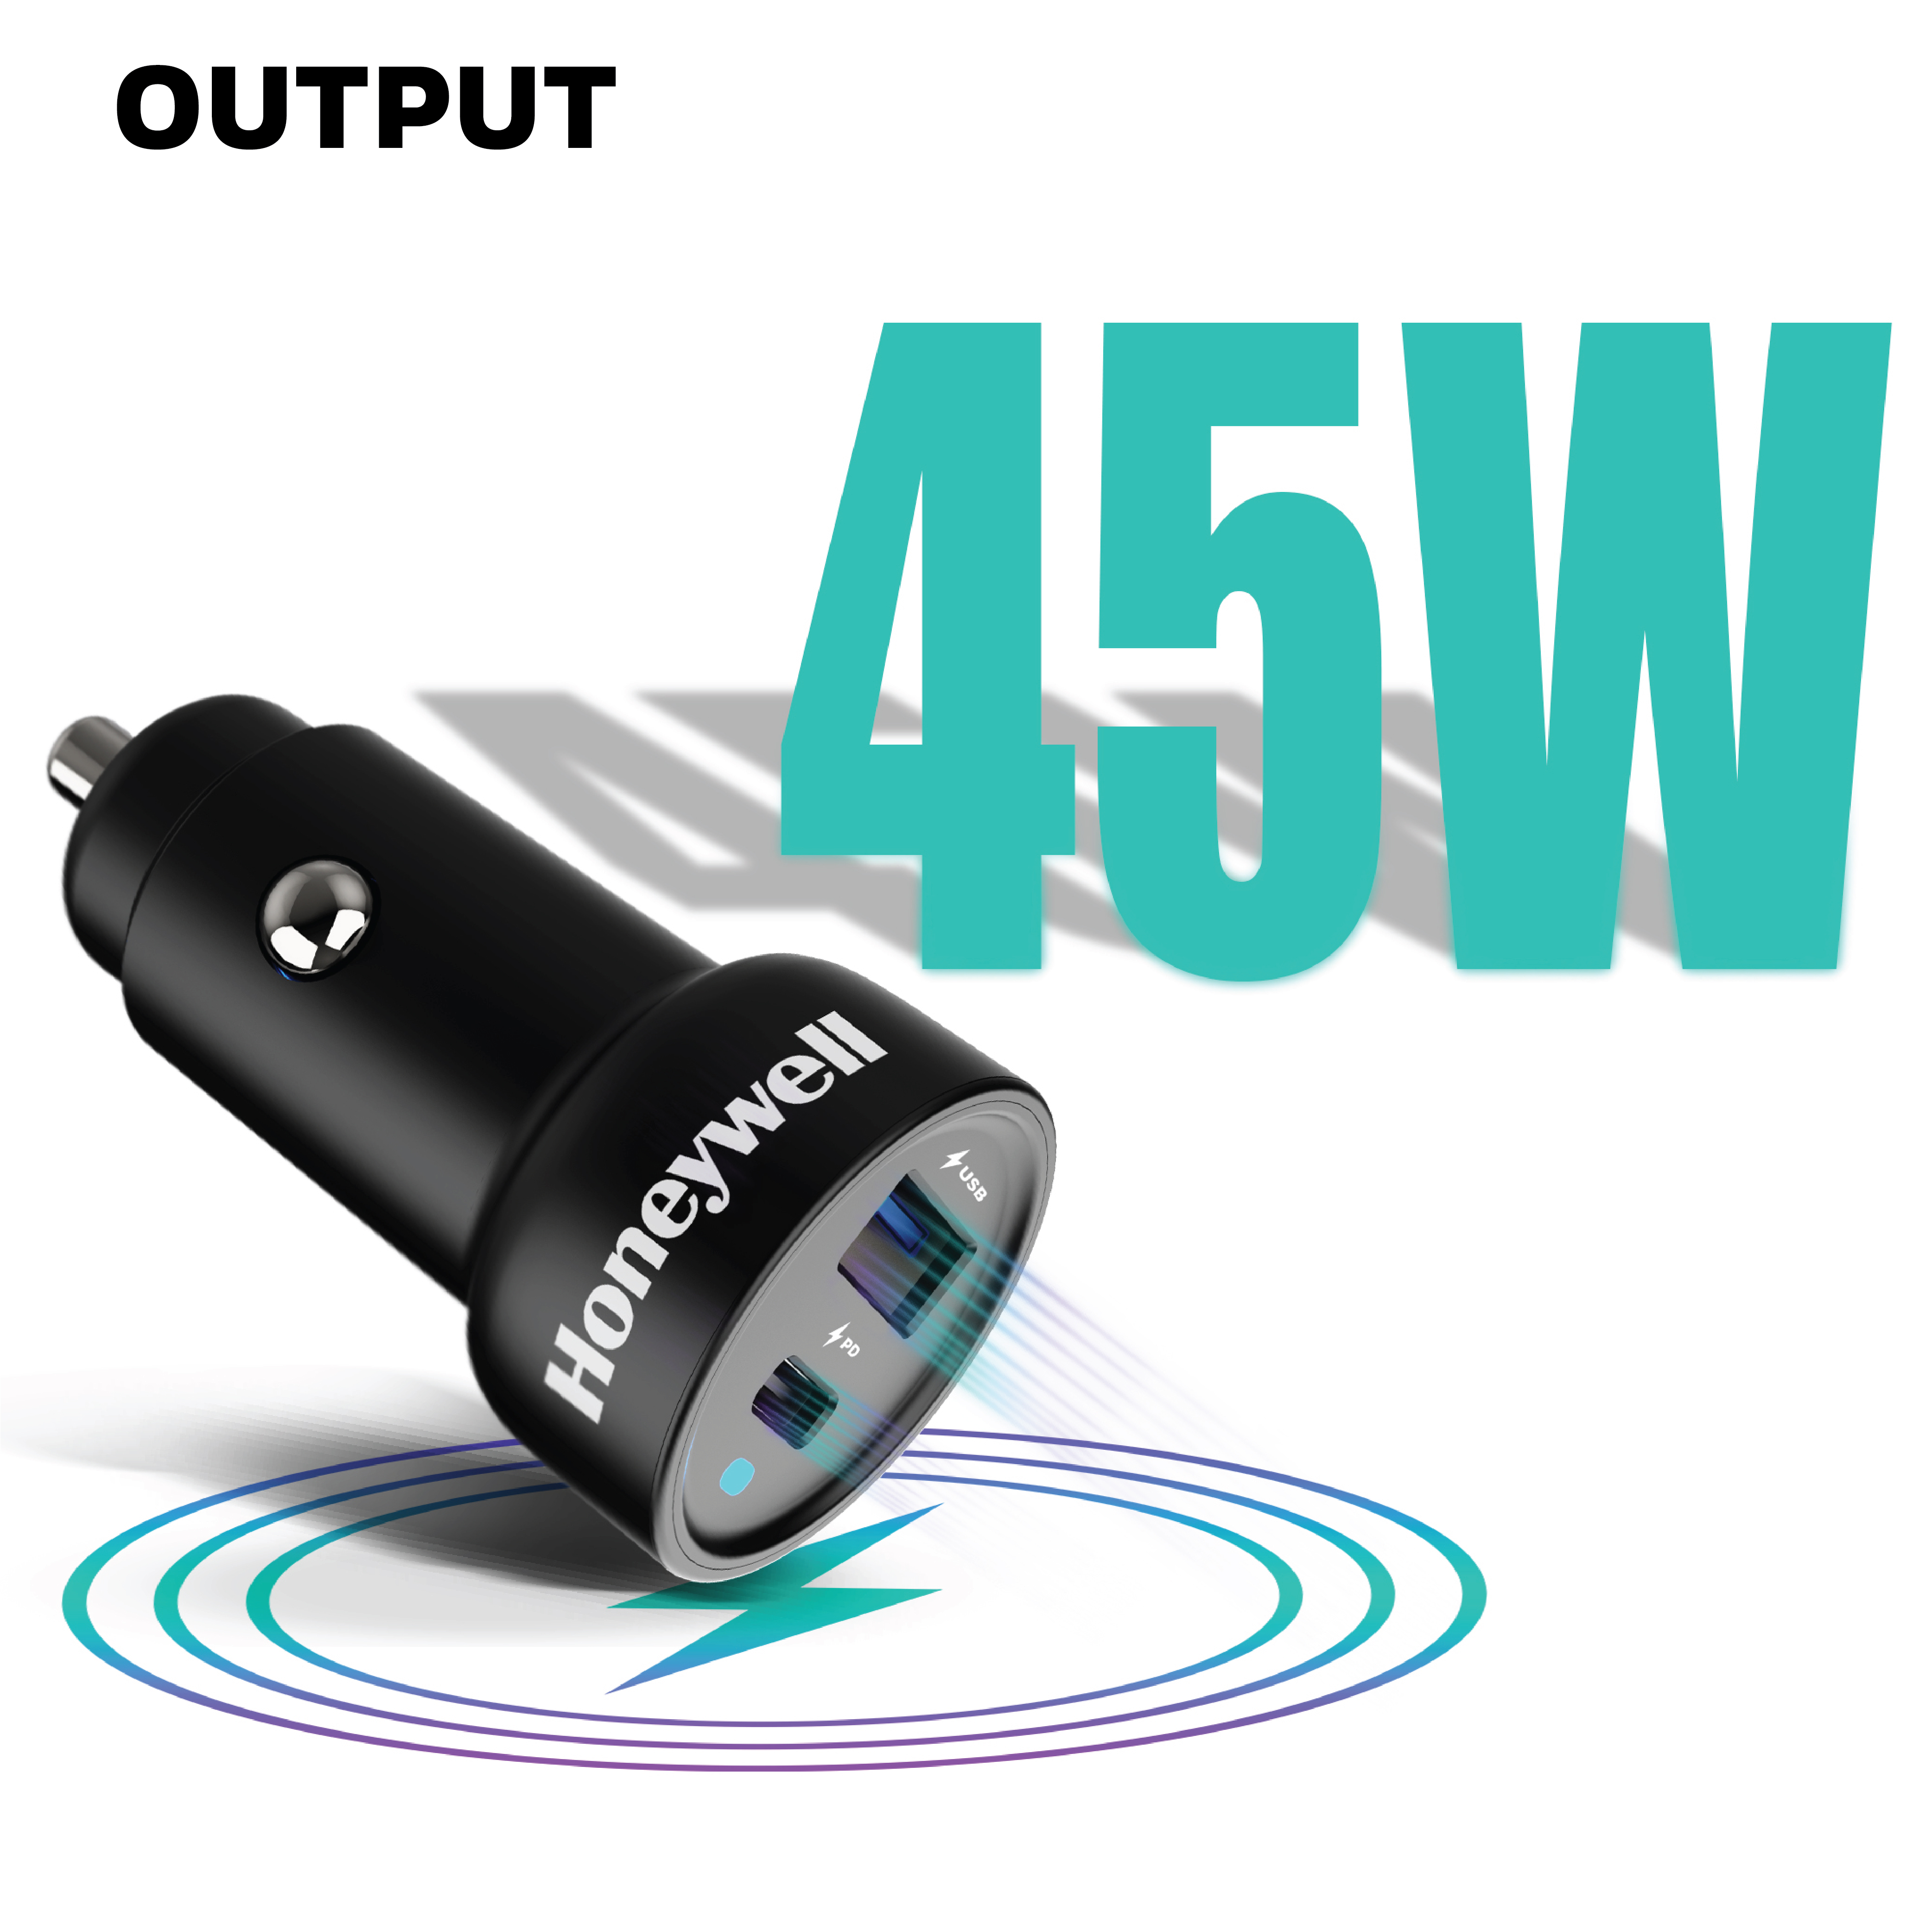 Honeywell Micro CLA 45W PD Smart Car Charger